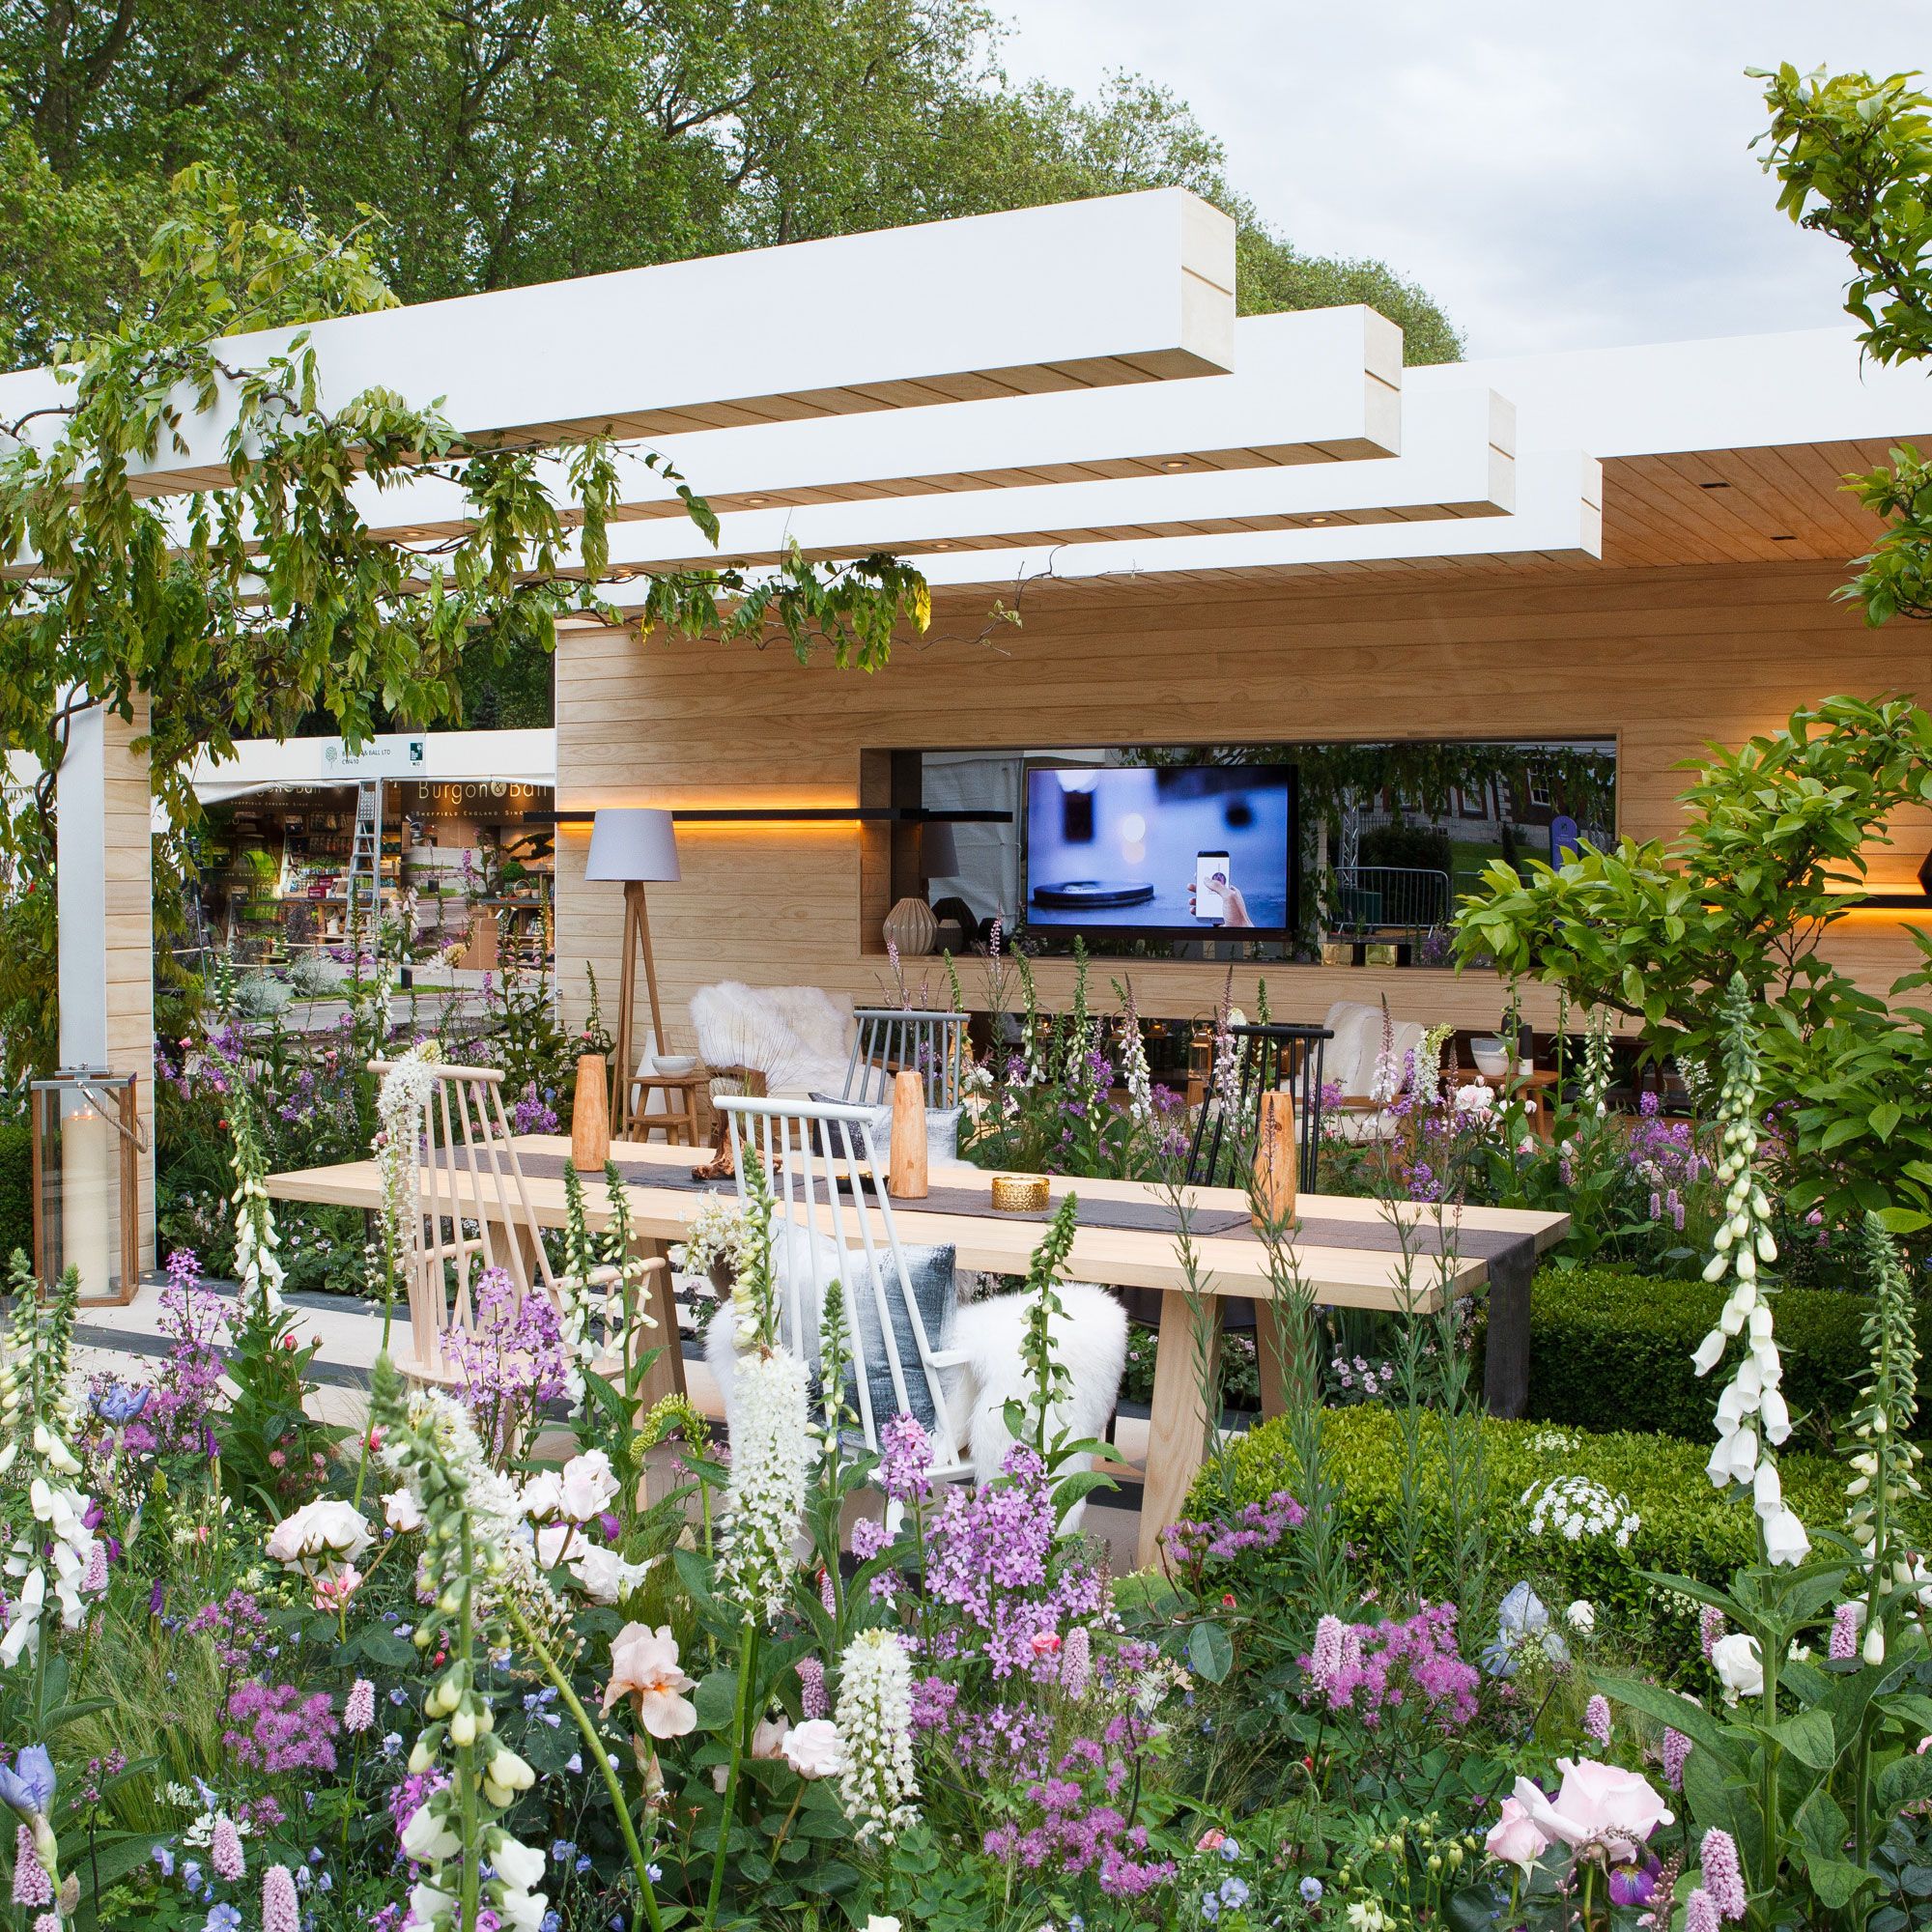 lg unveils a 'smart garden' at the chelsea flower show